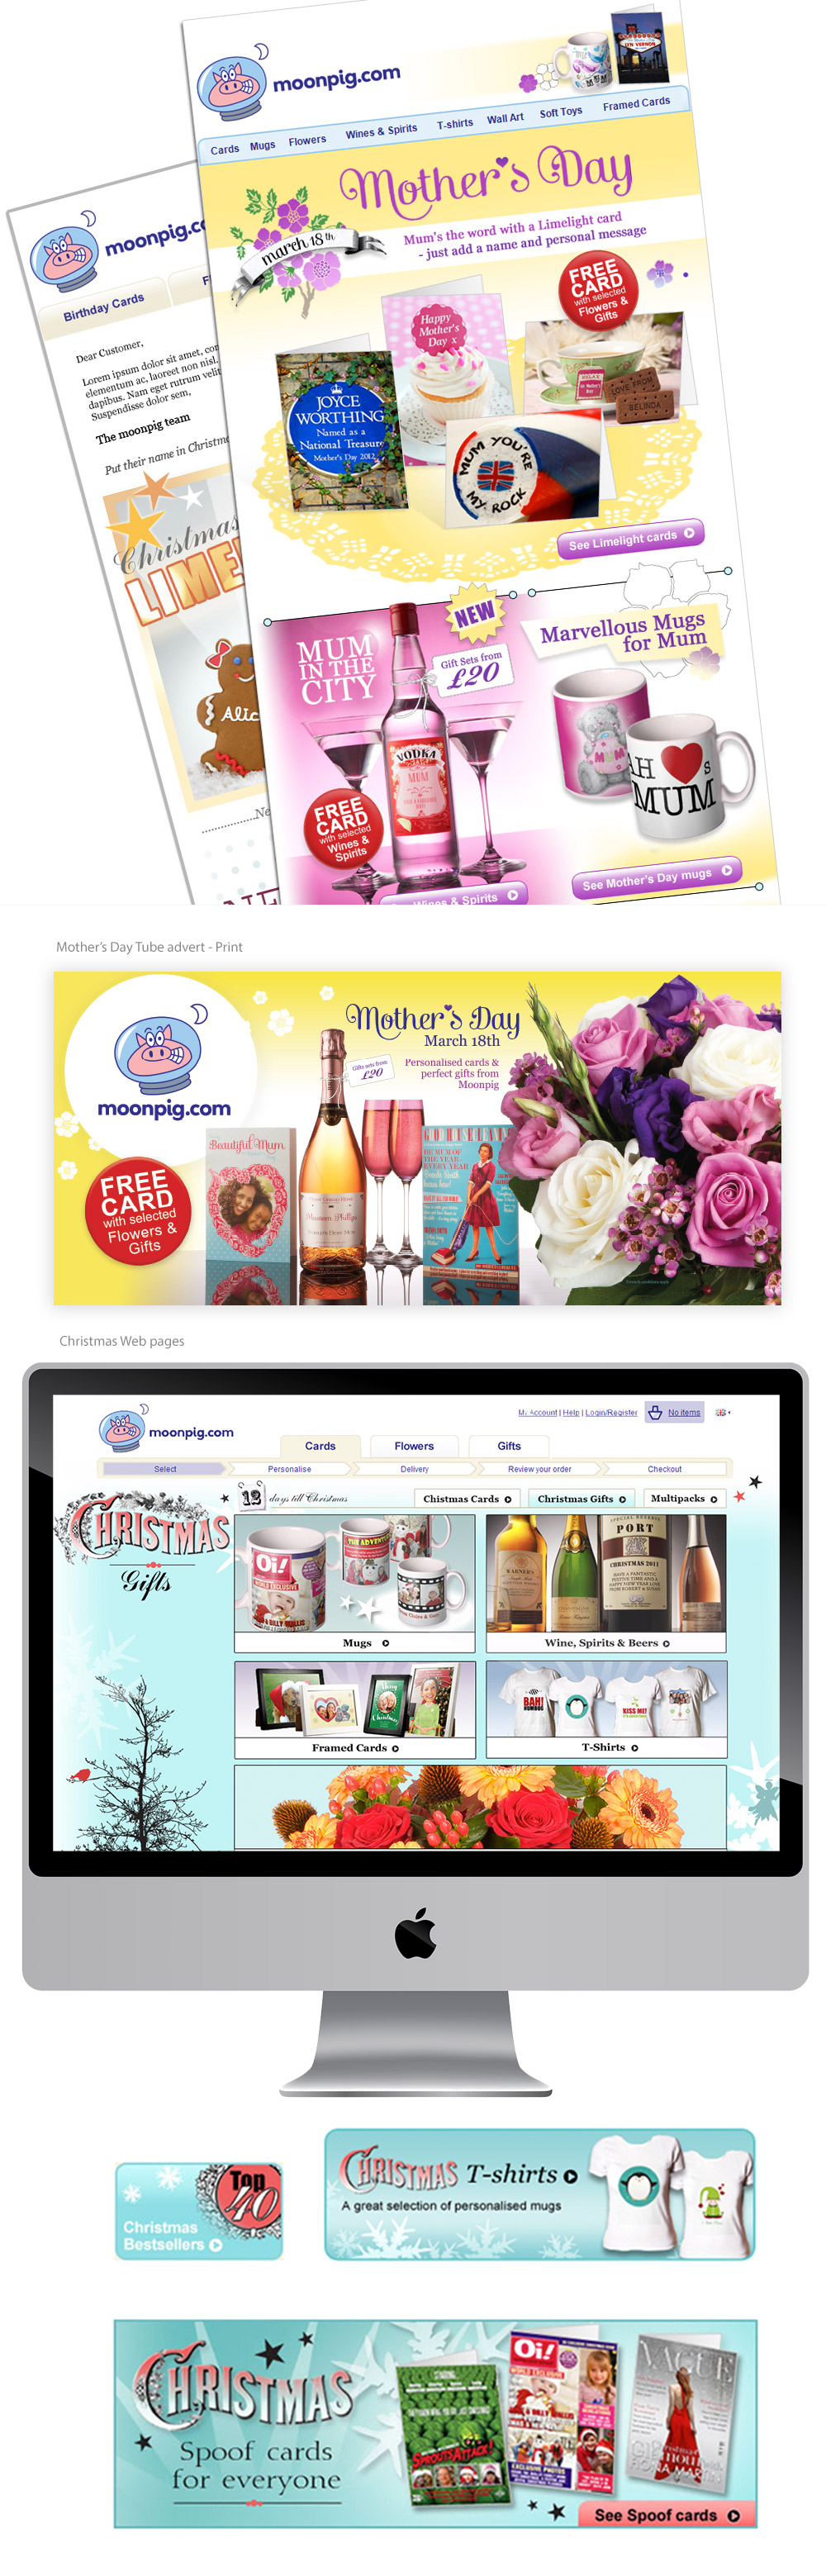 Moonpig-web-design-banners-and-email-campaign-design